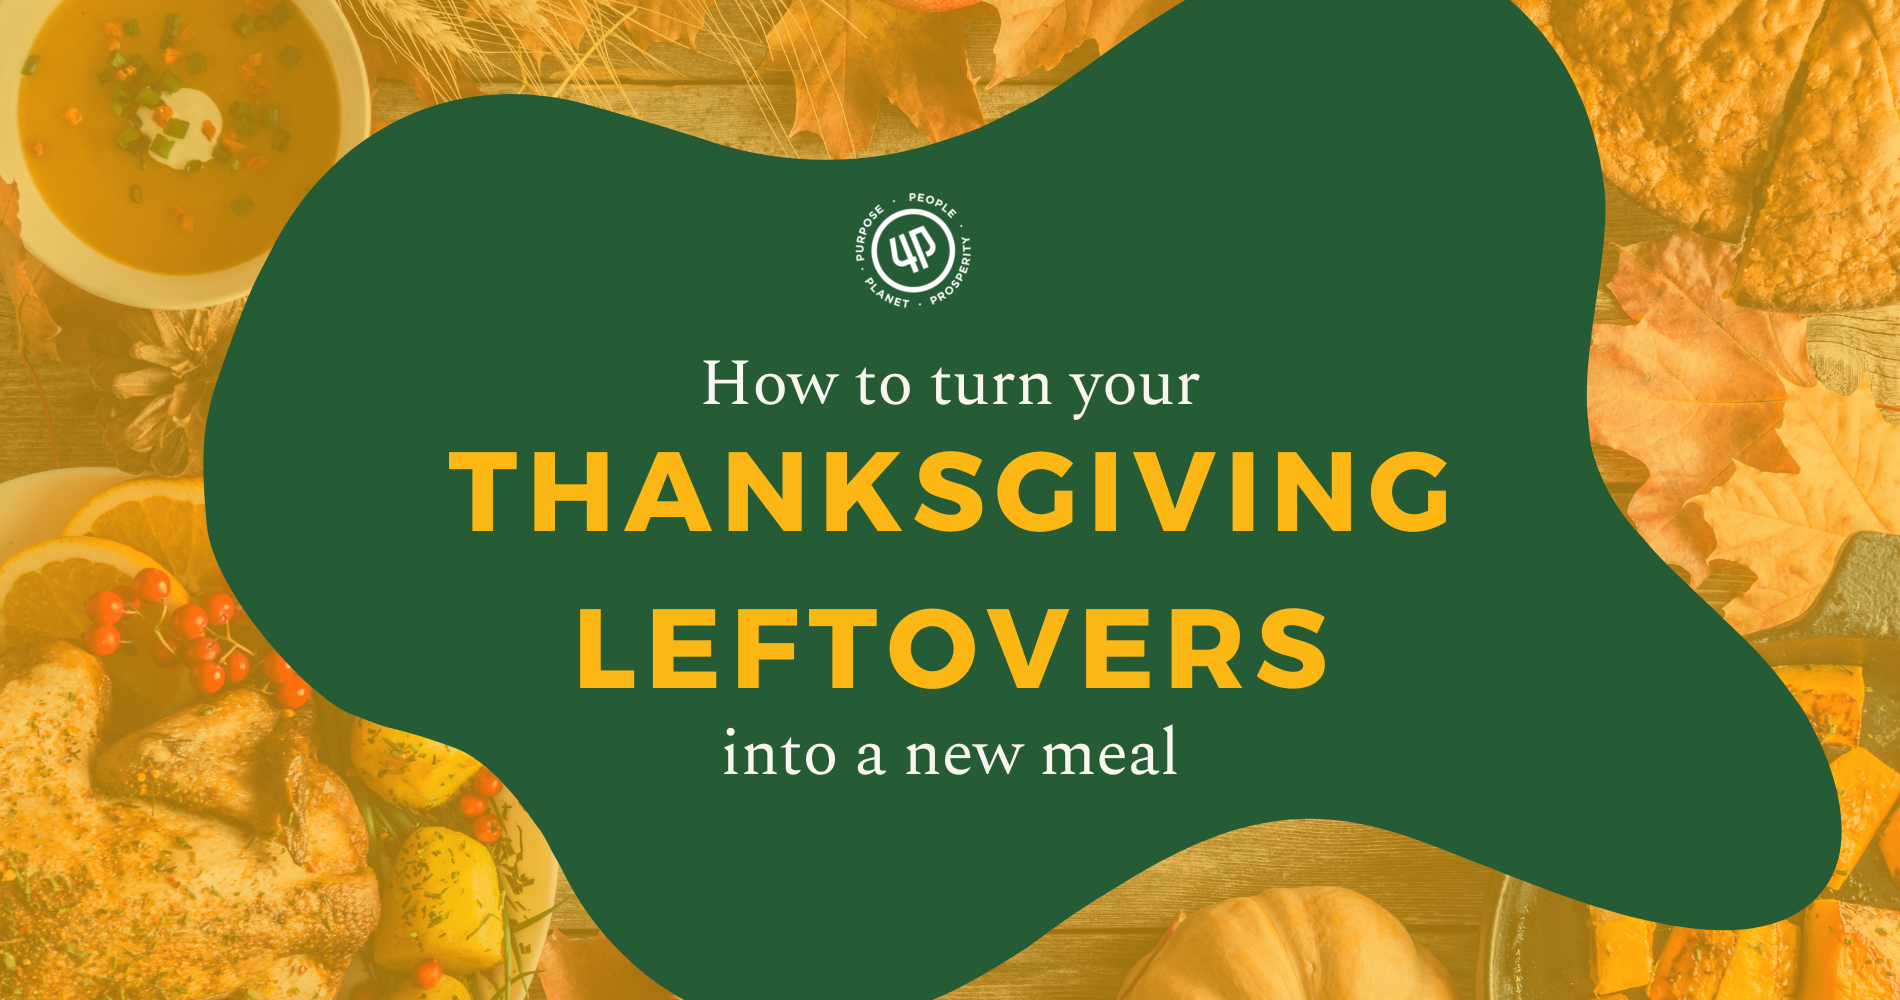 How to Turn Your Thanksgiving Leftovers into a New Meal image